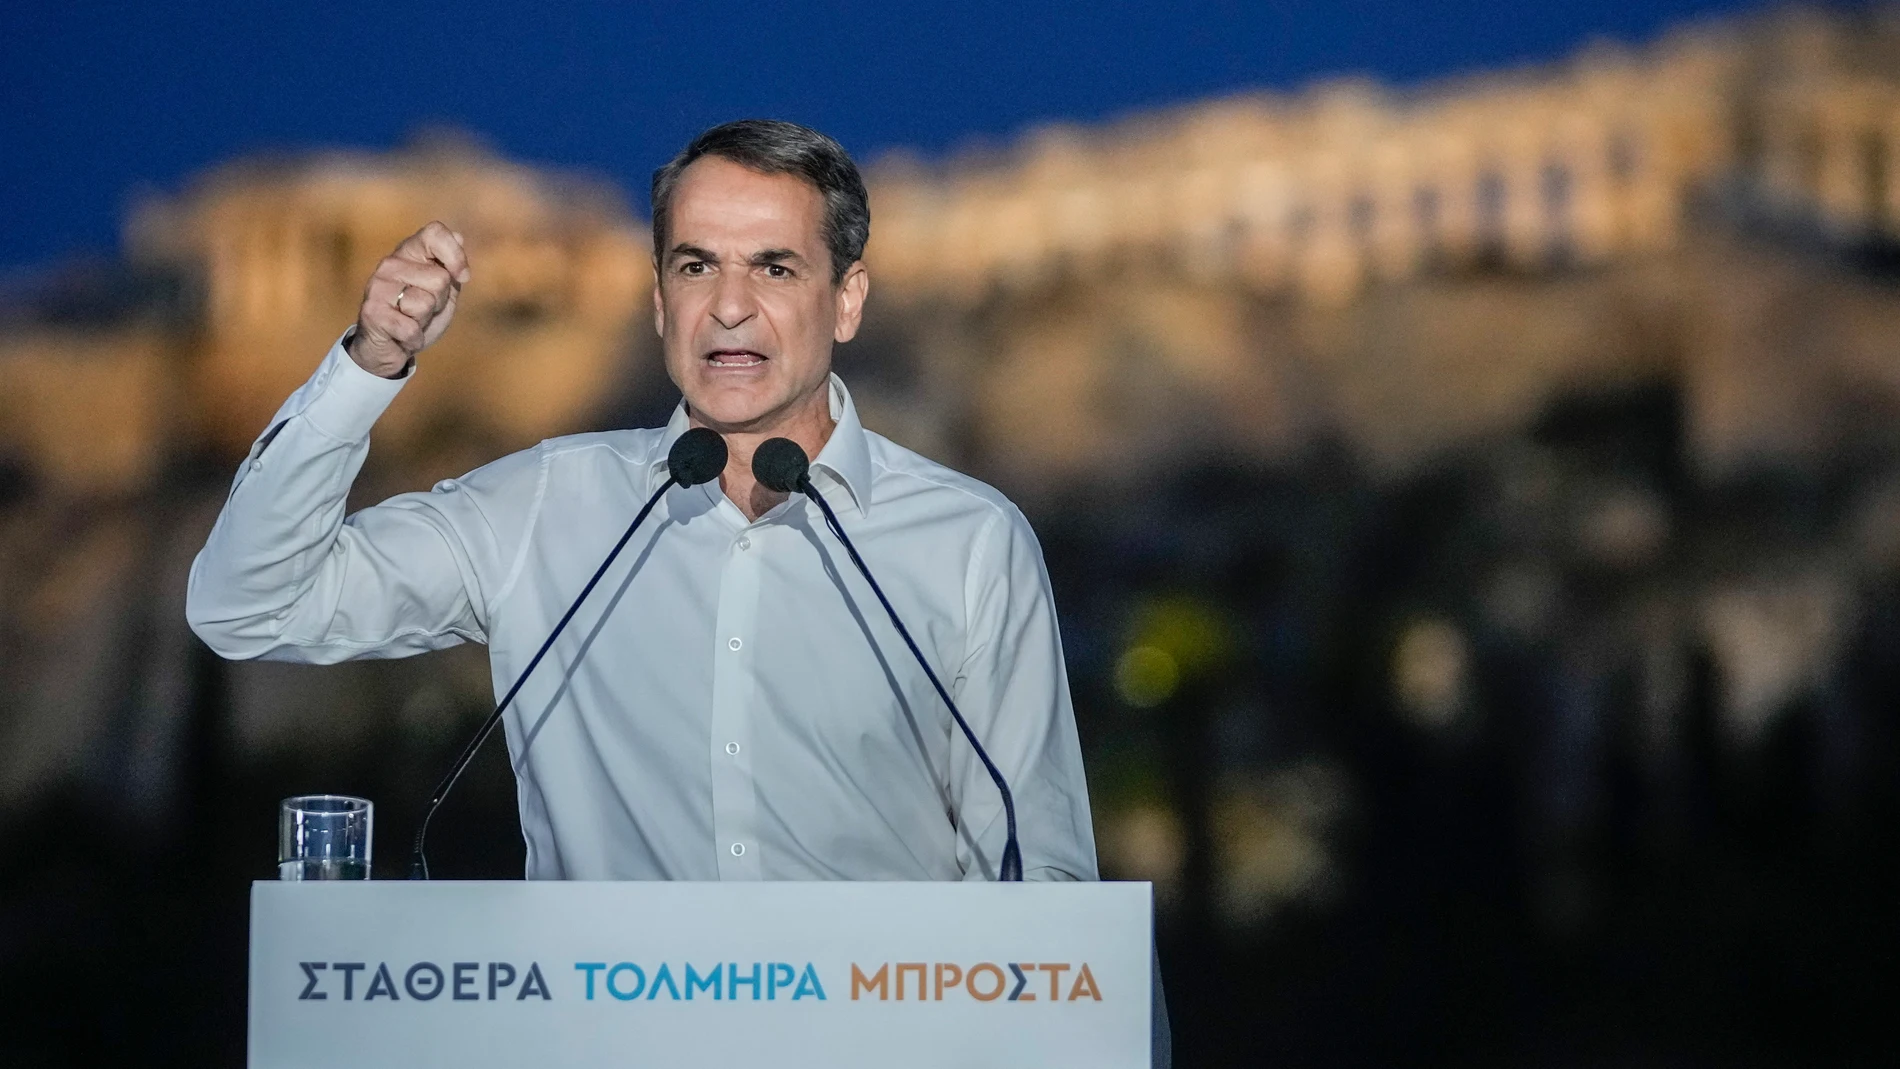 Greece's Prime Minister and New Democra